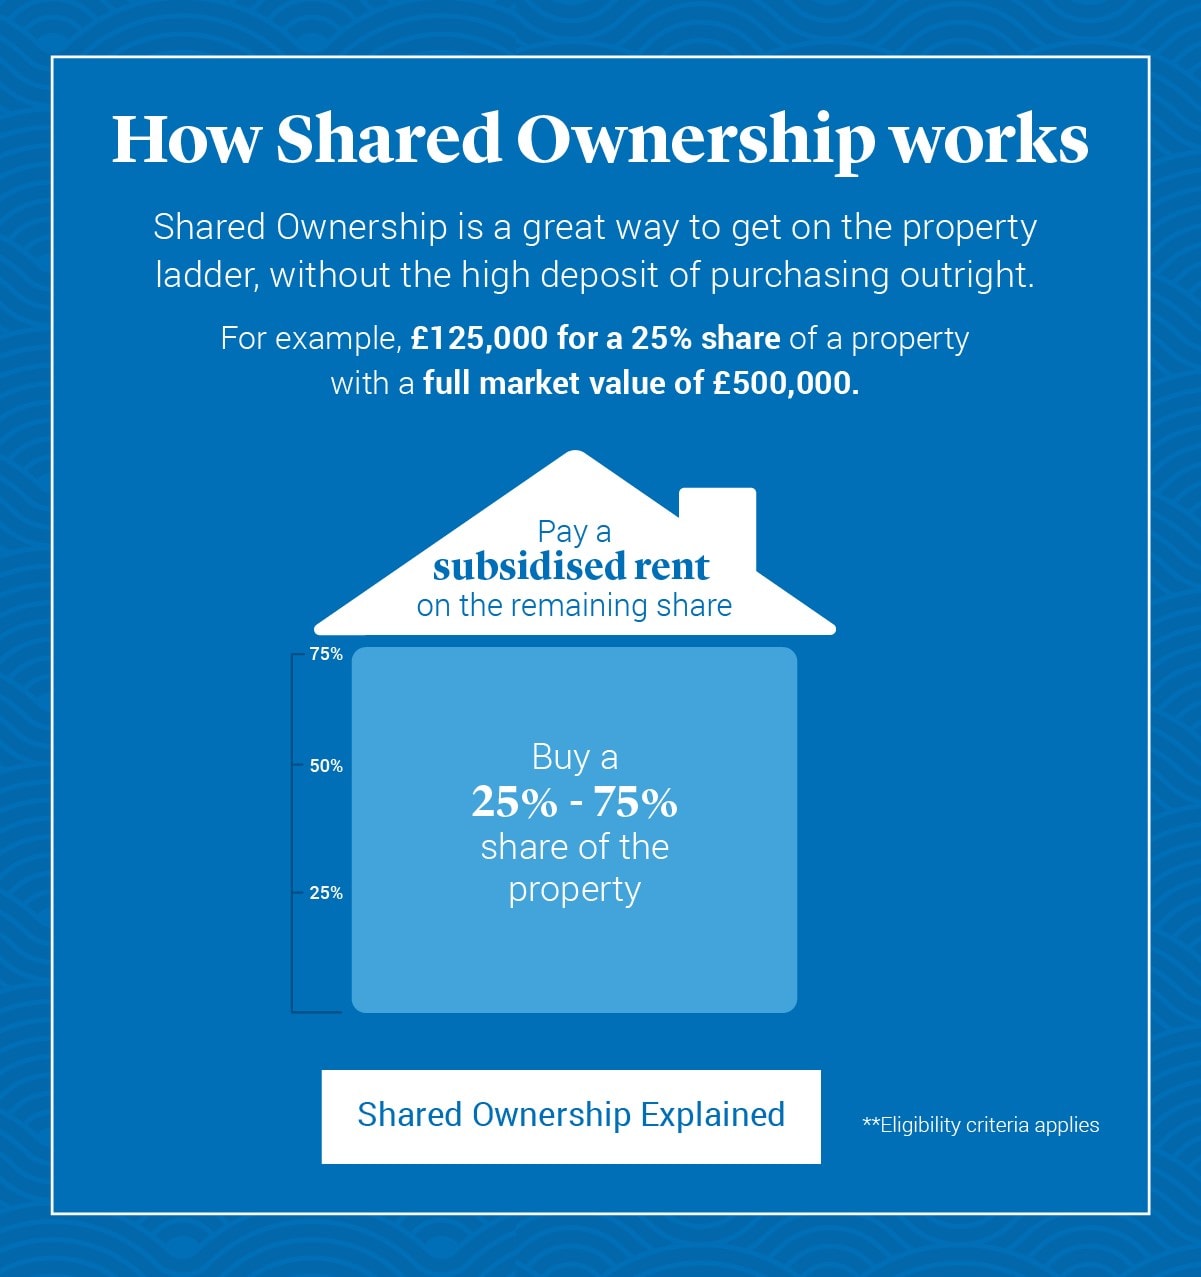 Legal and General - Shared Ownership